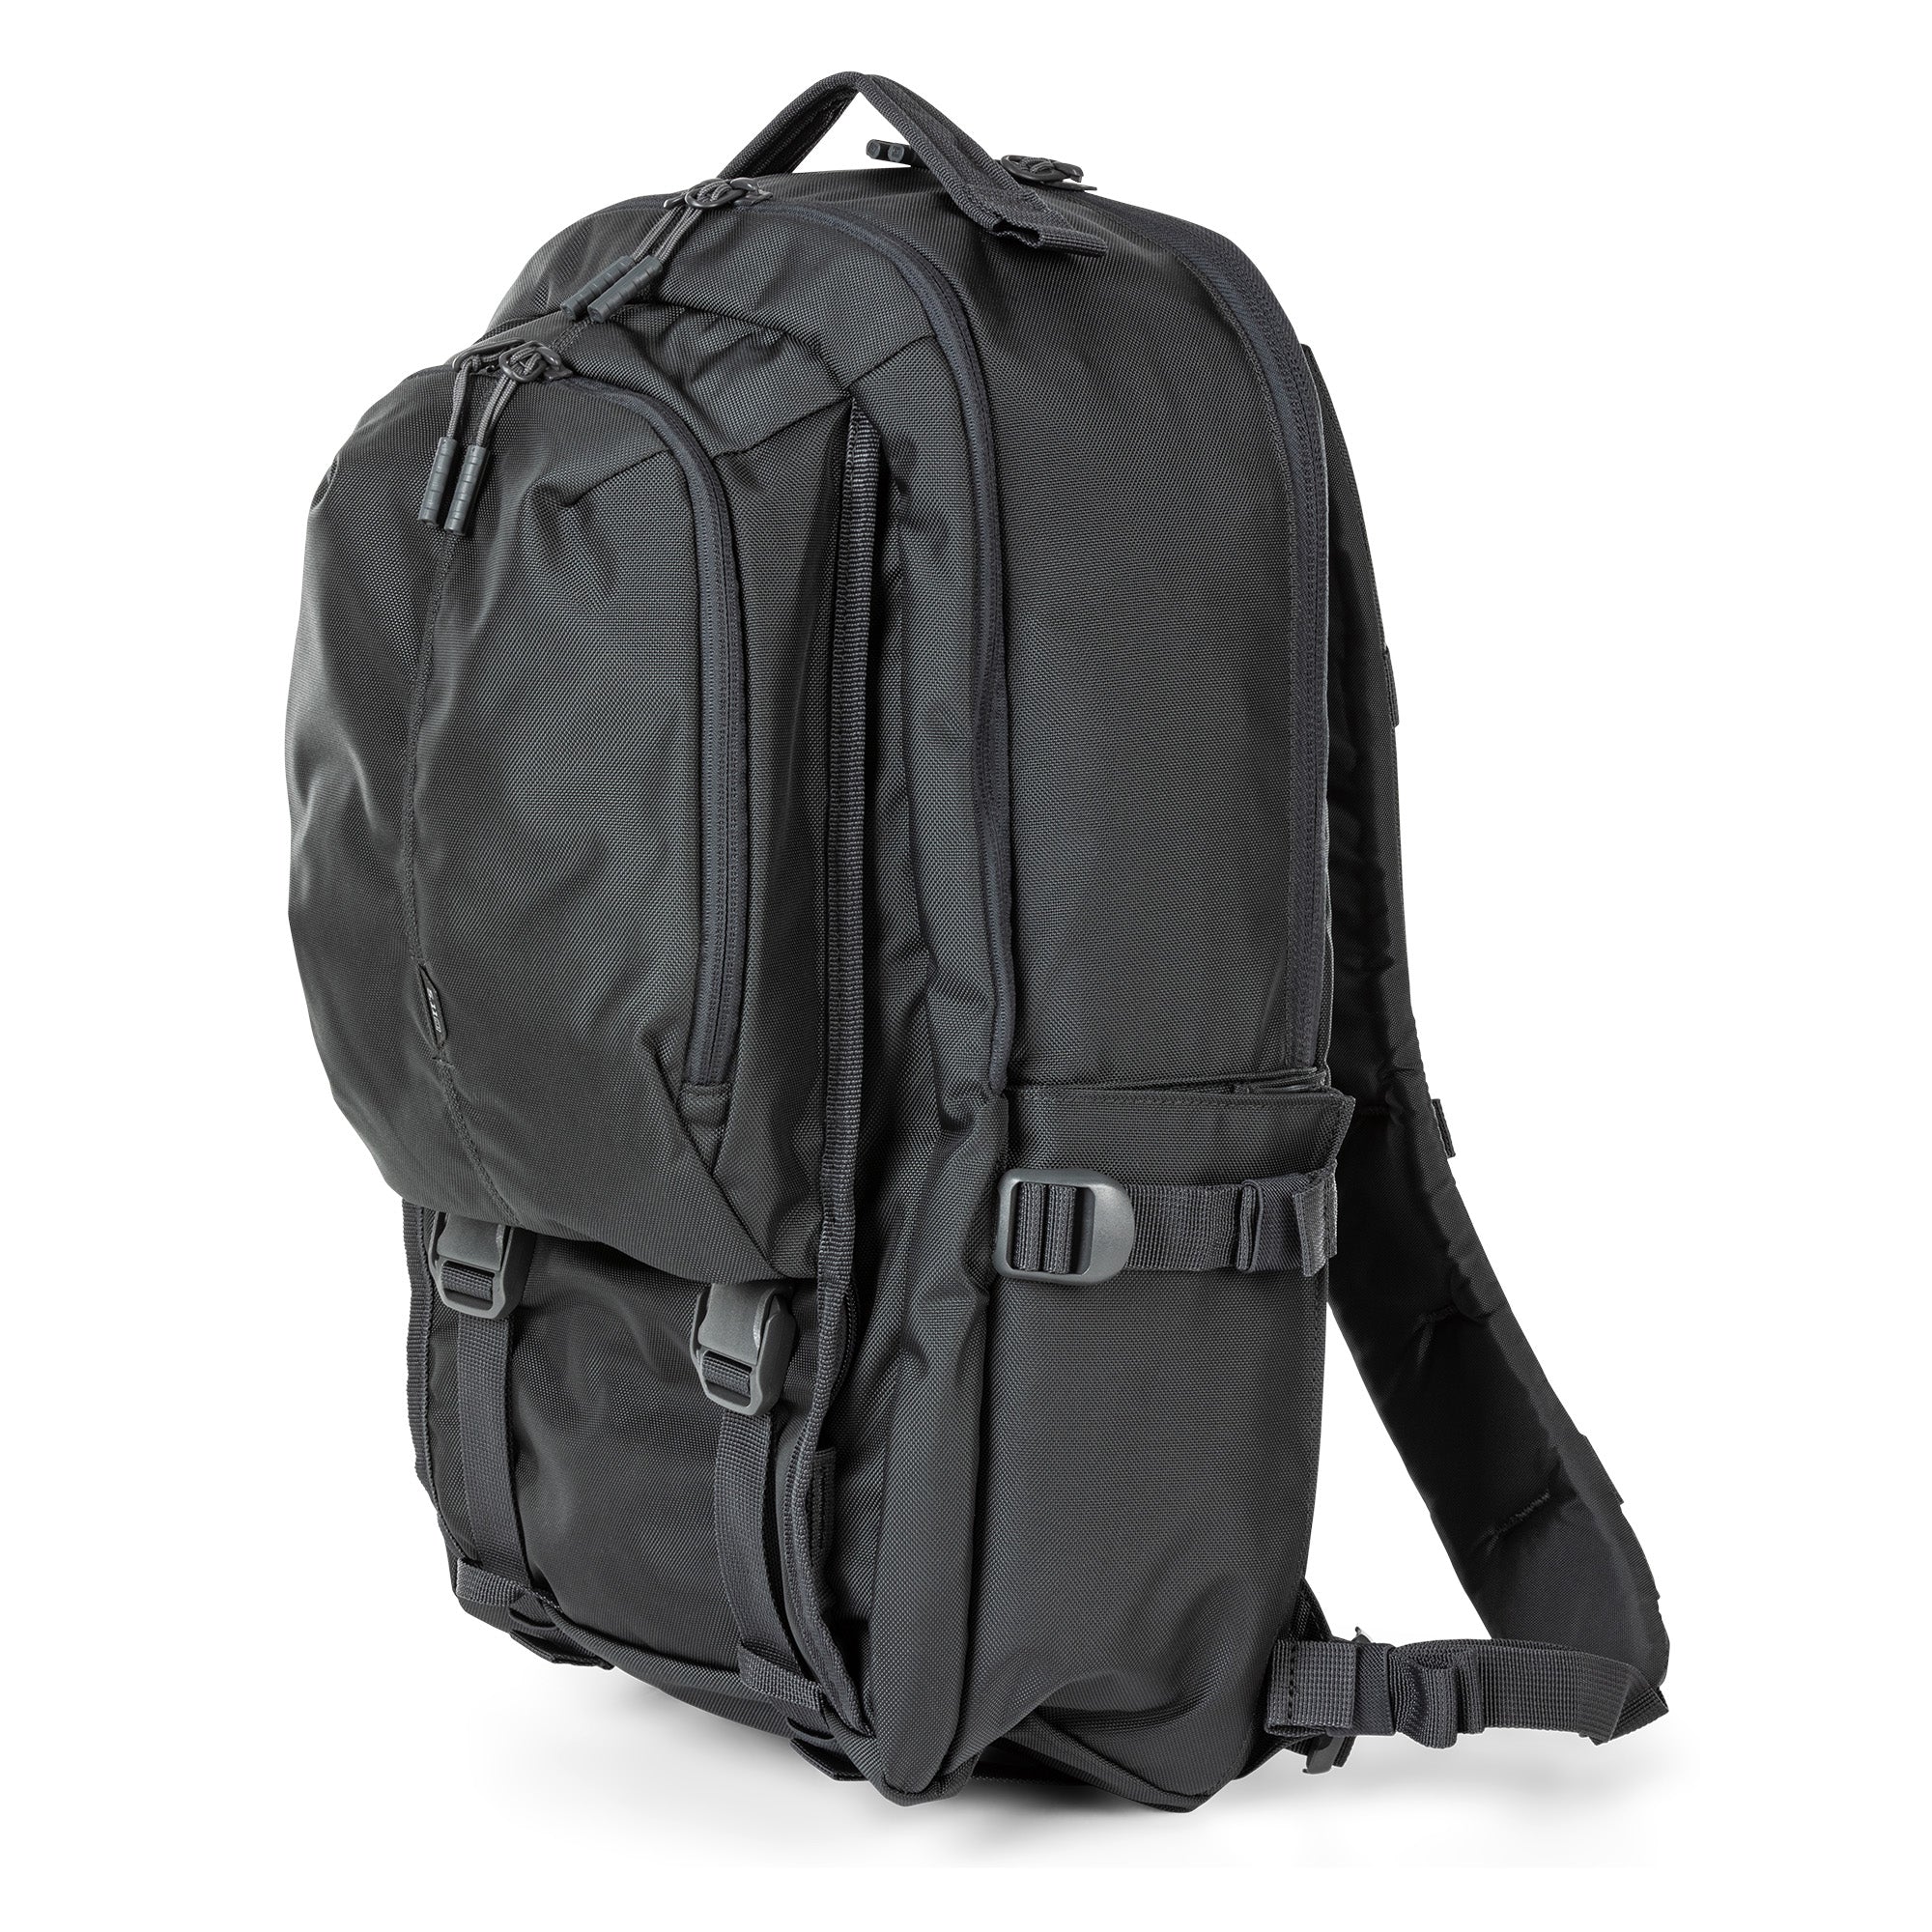 5.11 TACTICAL バックパック LV18 リュックサック